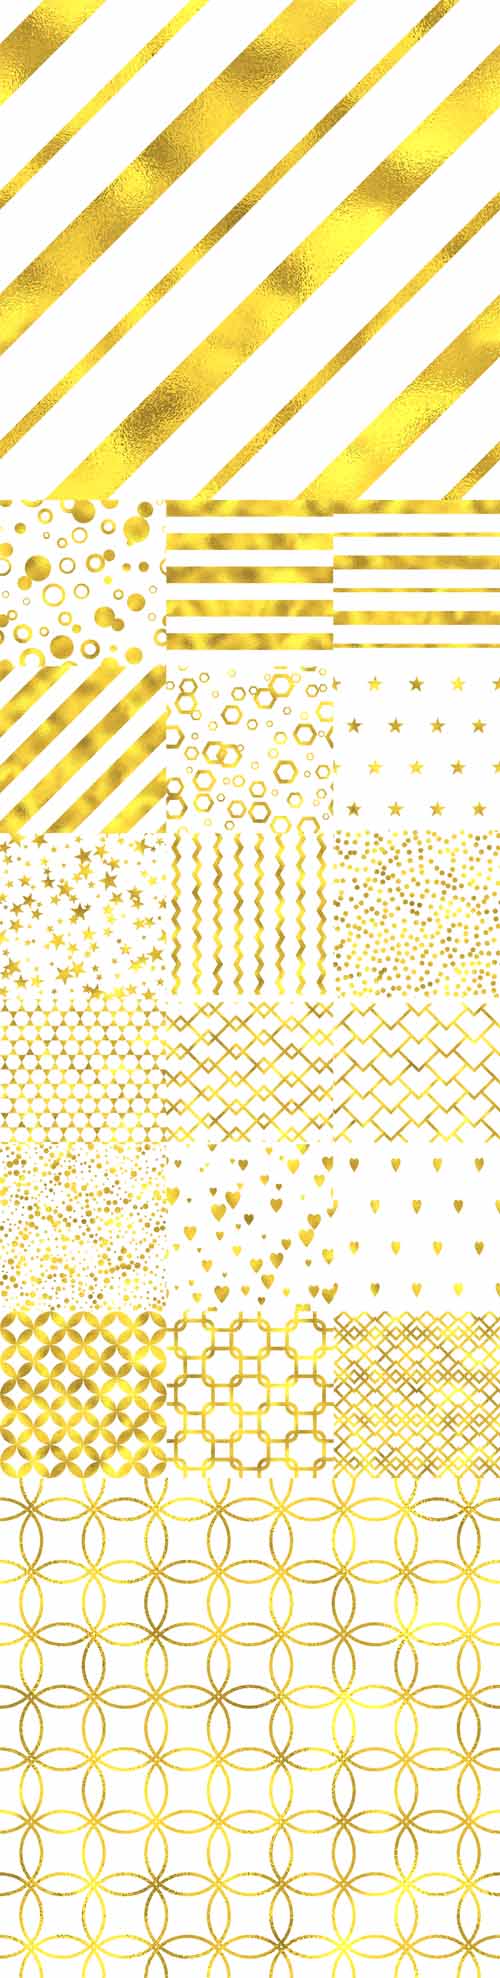 Vector Gold Glittering Foil Seamless Pattern Backgrounds